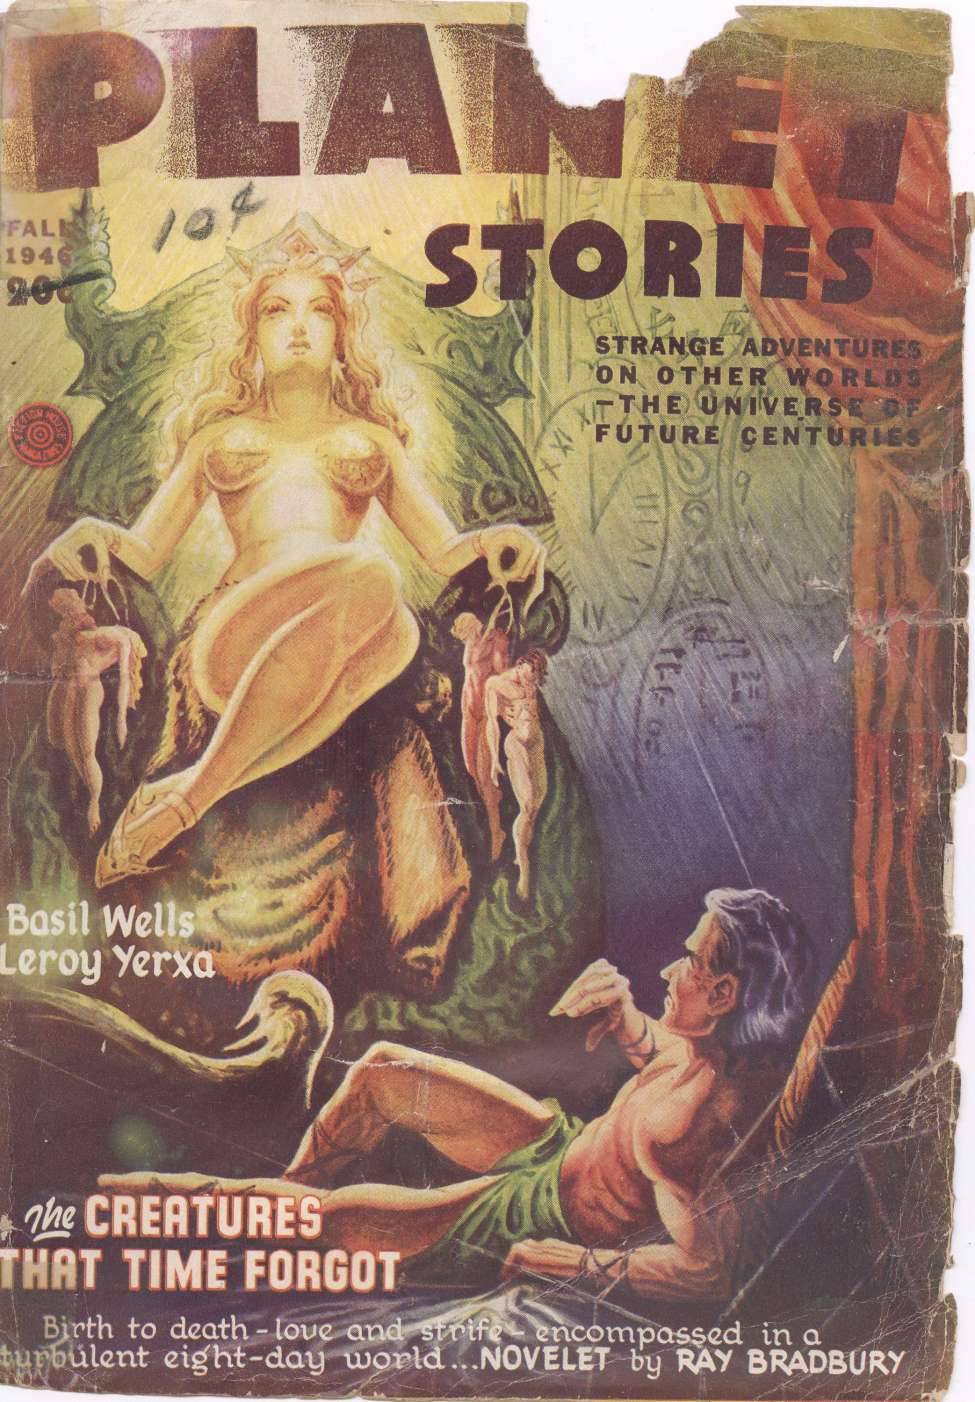 Book Cover For Planet Stories v3 4 - The Creatures That Time Forgot - Ray Bradbury